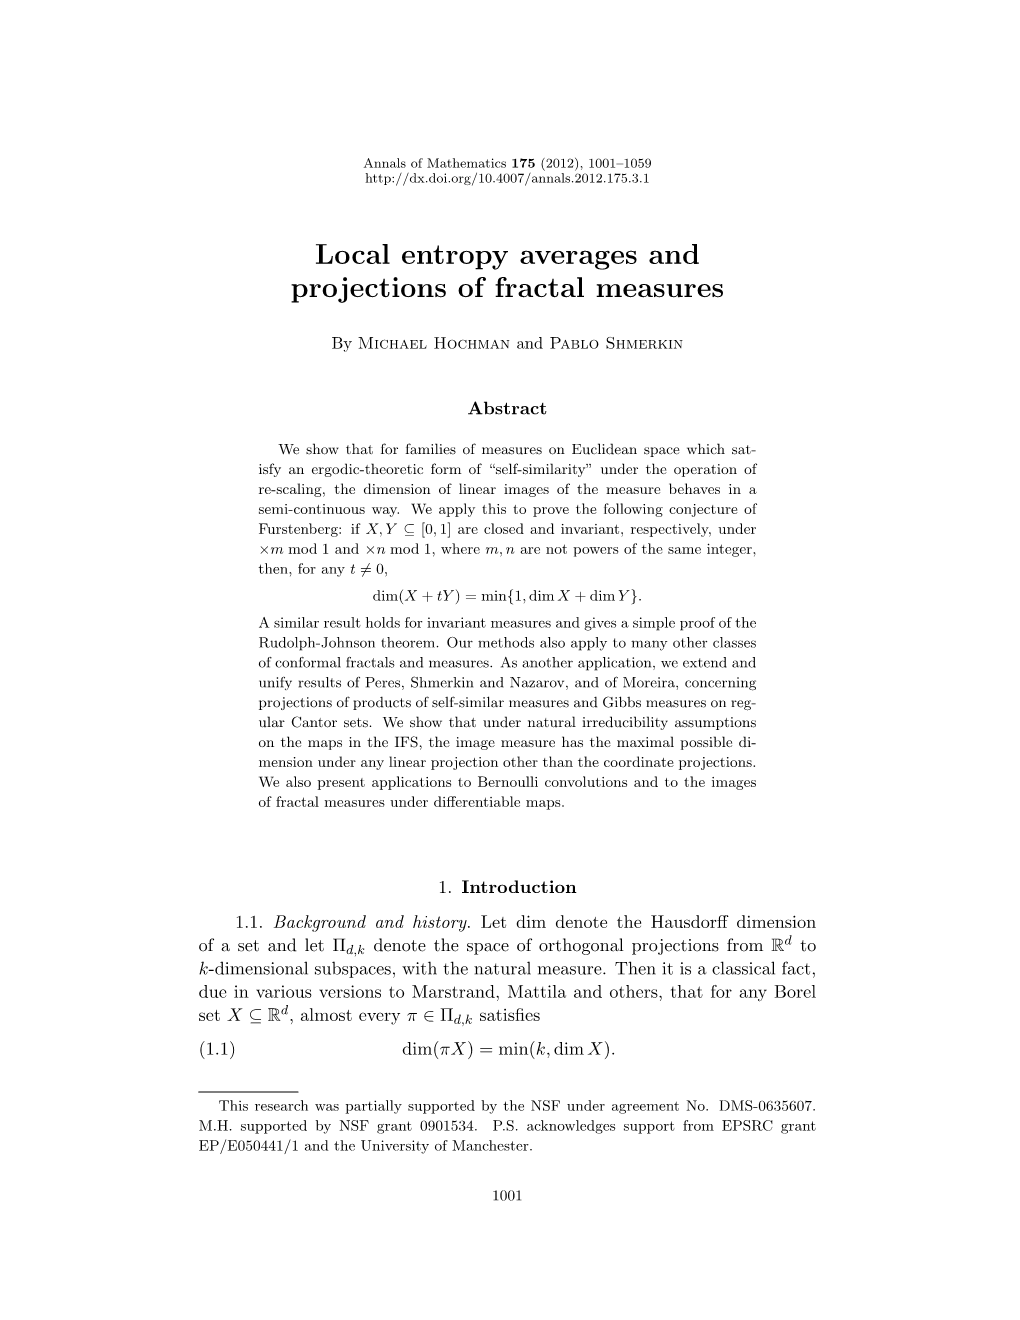 Local Entropy Averages and Projections of Fractal Measures